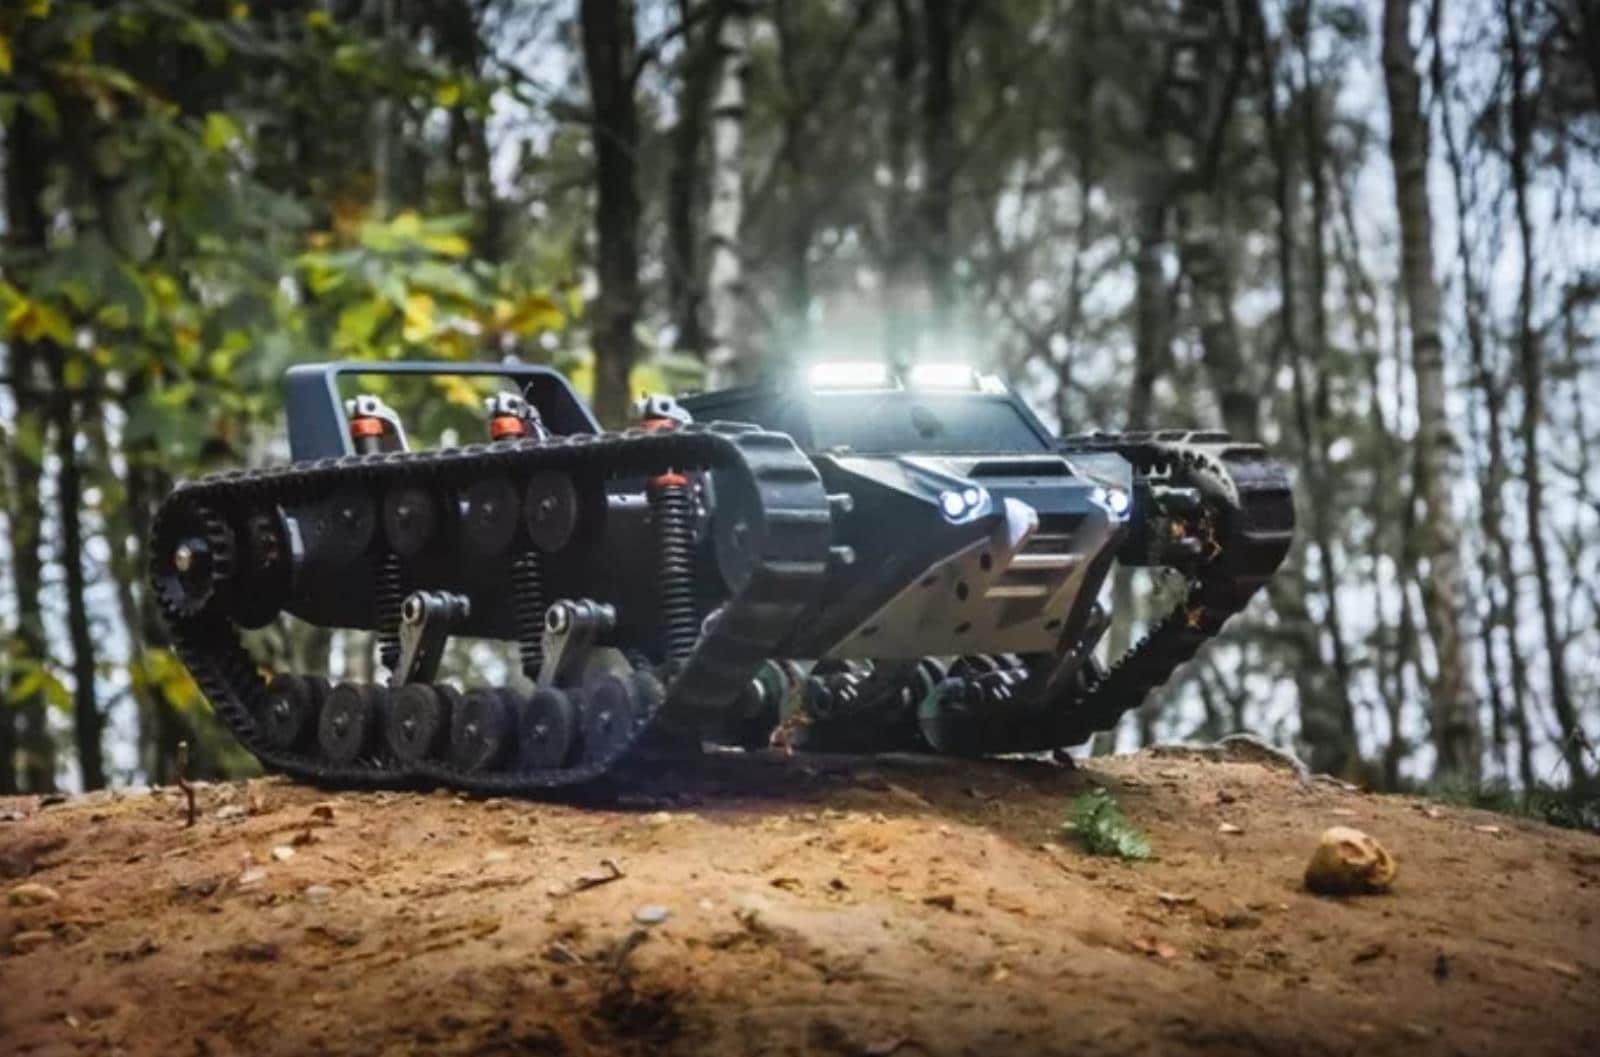 This is the tracked remote control XRC Brawler that anyone can buy